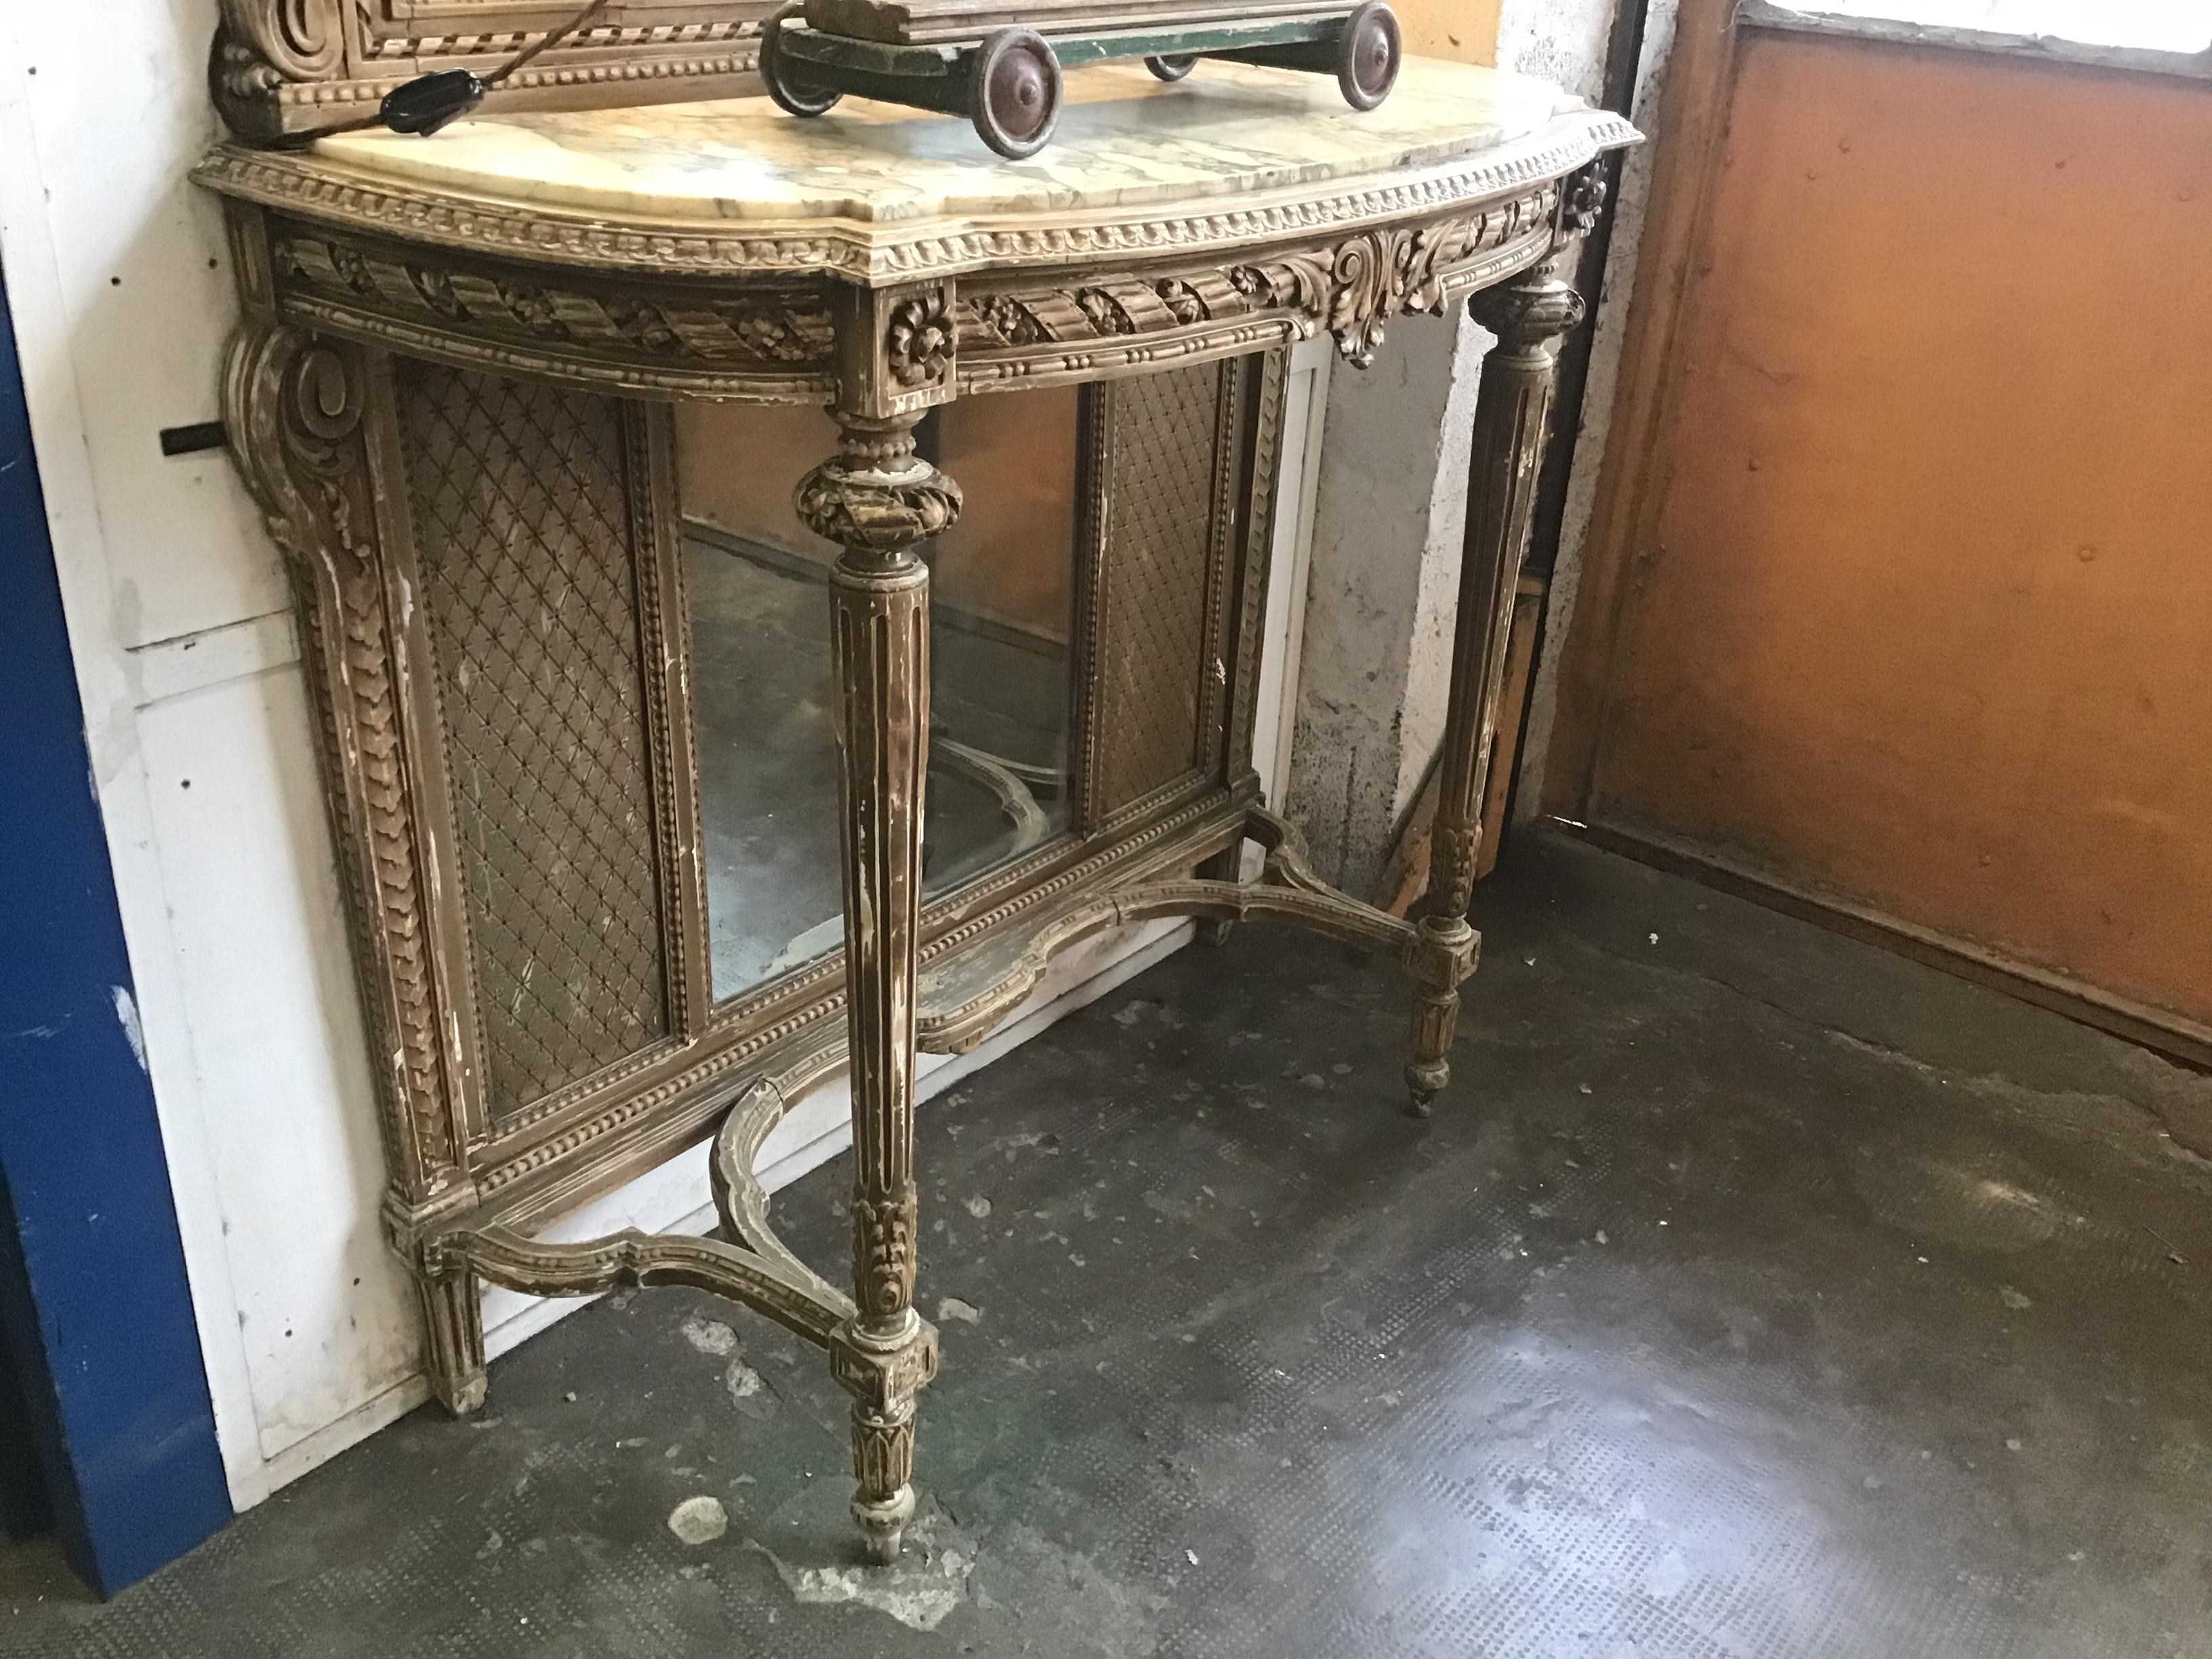 19th Century French Marble-Top Console with Giltwood Framed Mirror from 1890s (Geschnitzt)